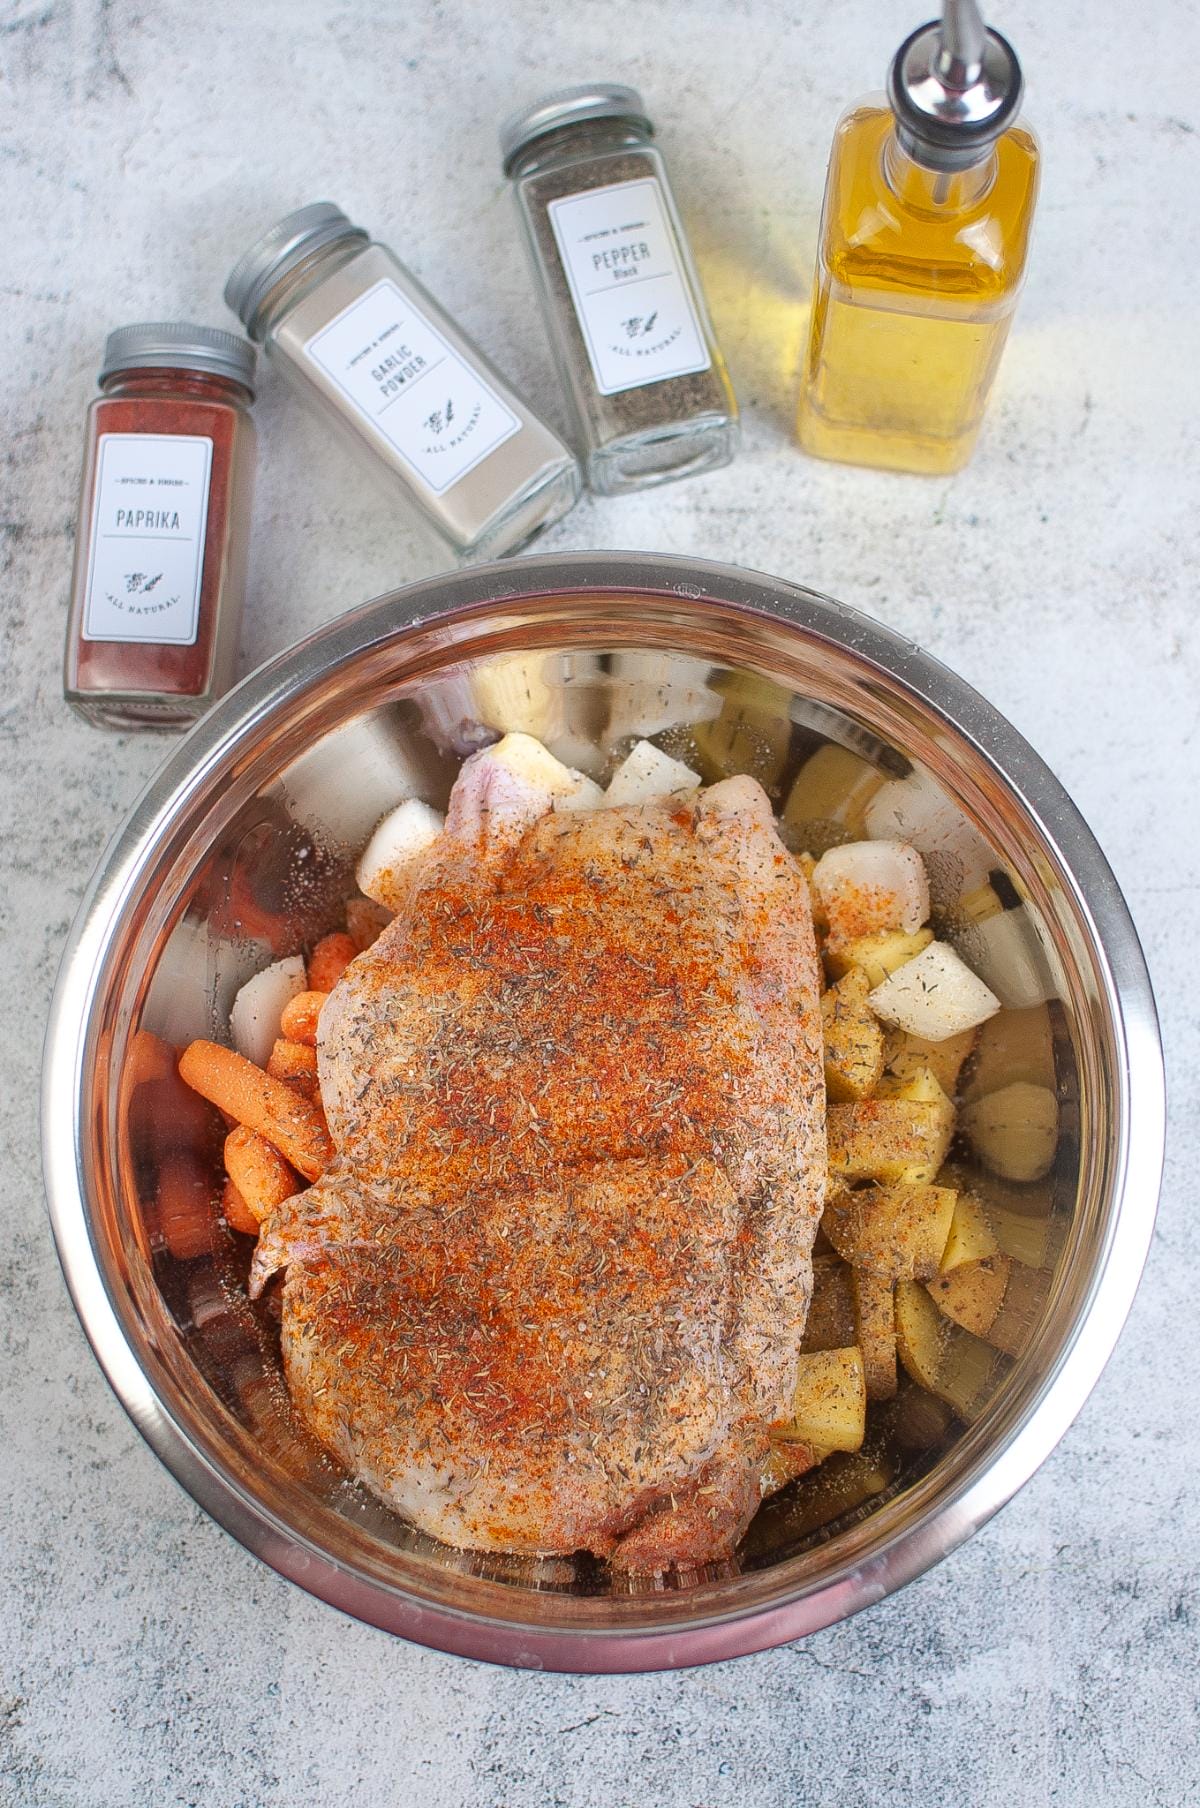 Half chicken, vegetables, and spices in a mixing bowl.